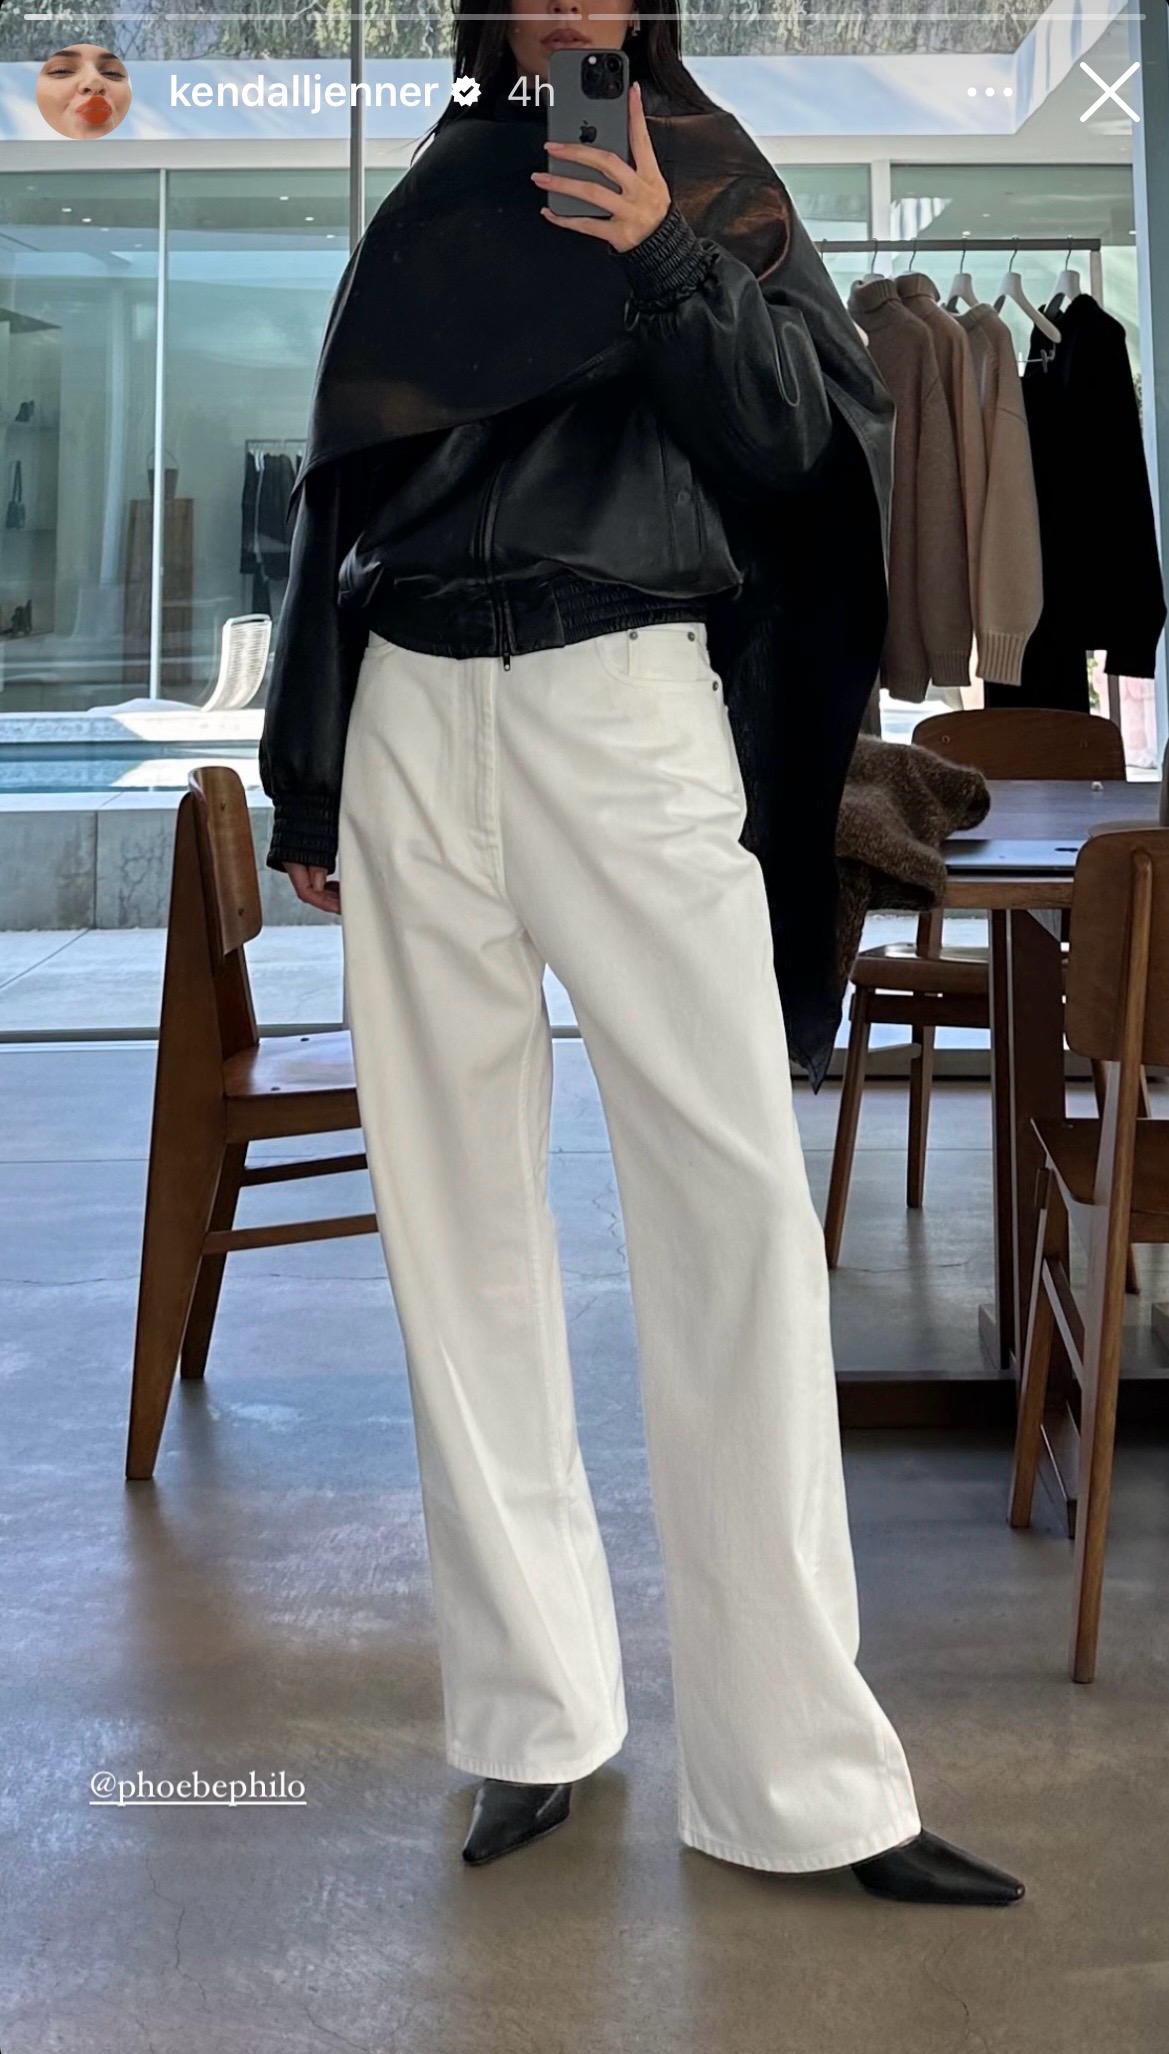 Kendall-Jenner-Phoebe-Philo-The-Row